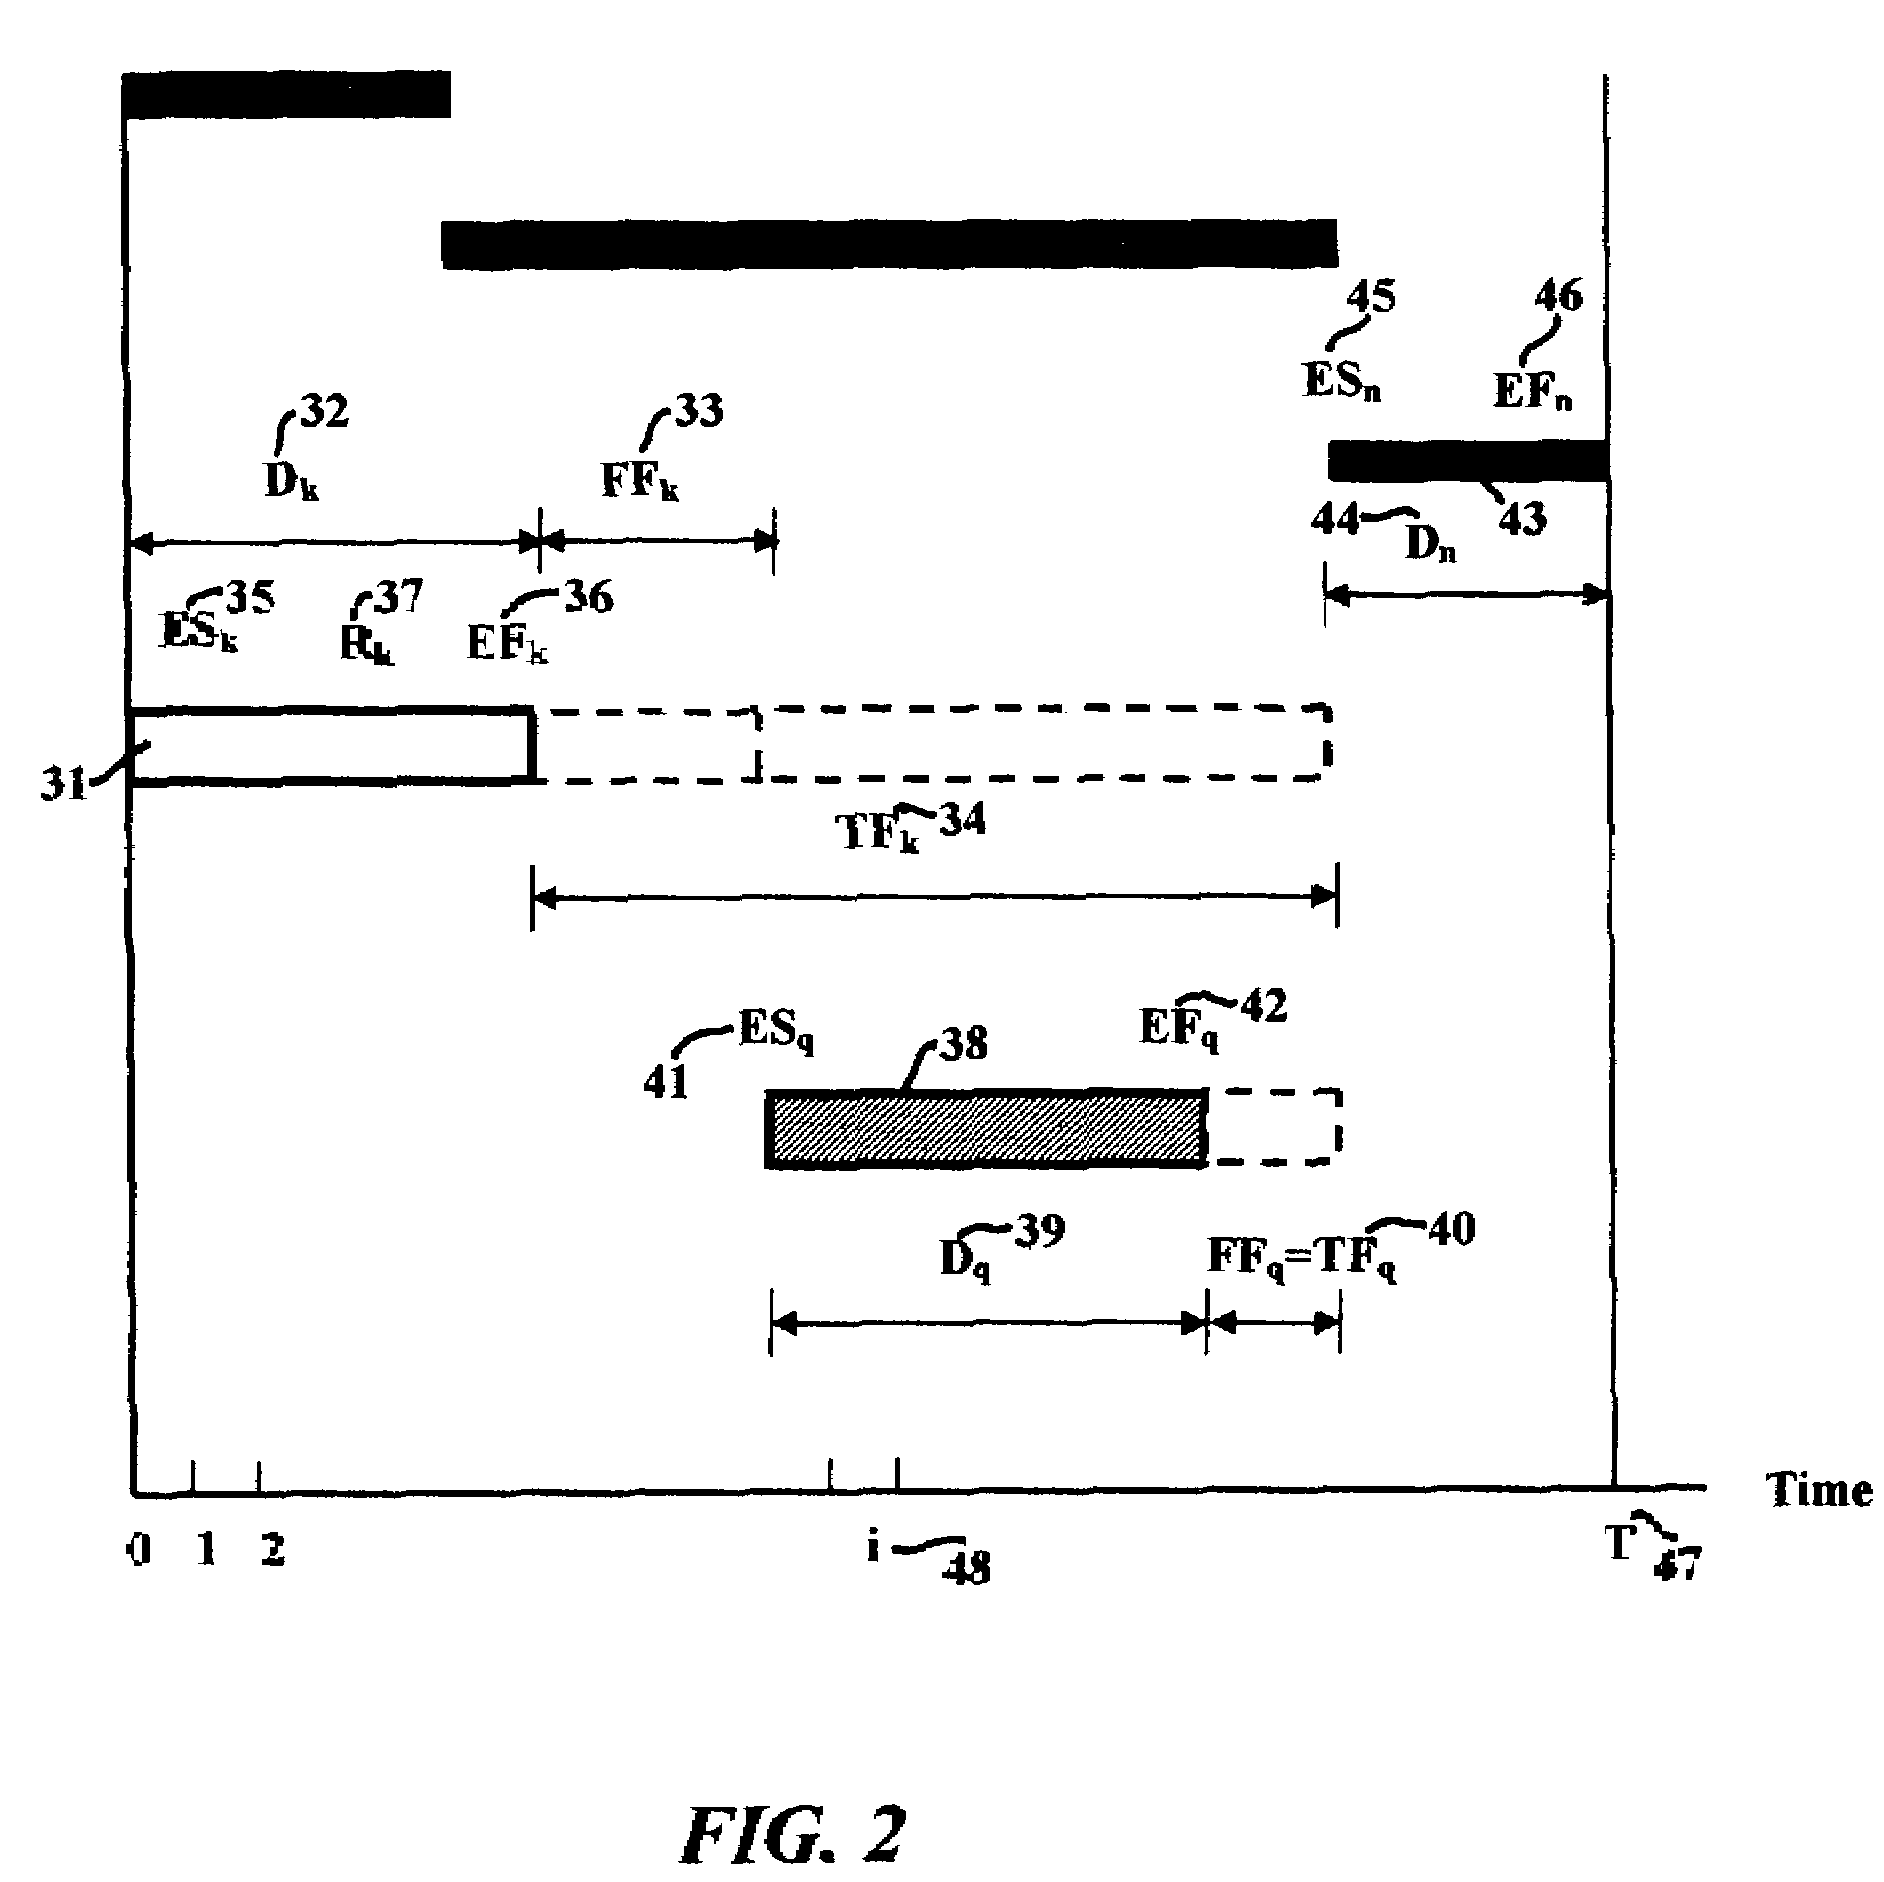 Method and apparatus for finance-based scheduling of construction projects